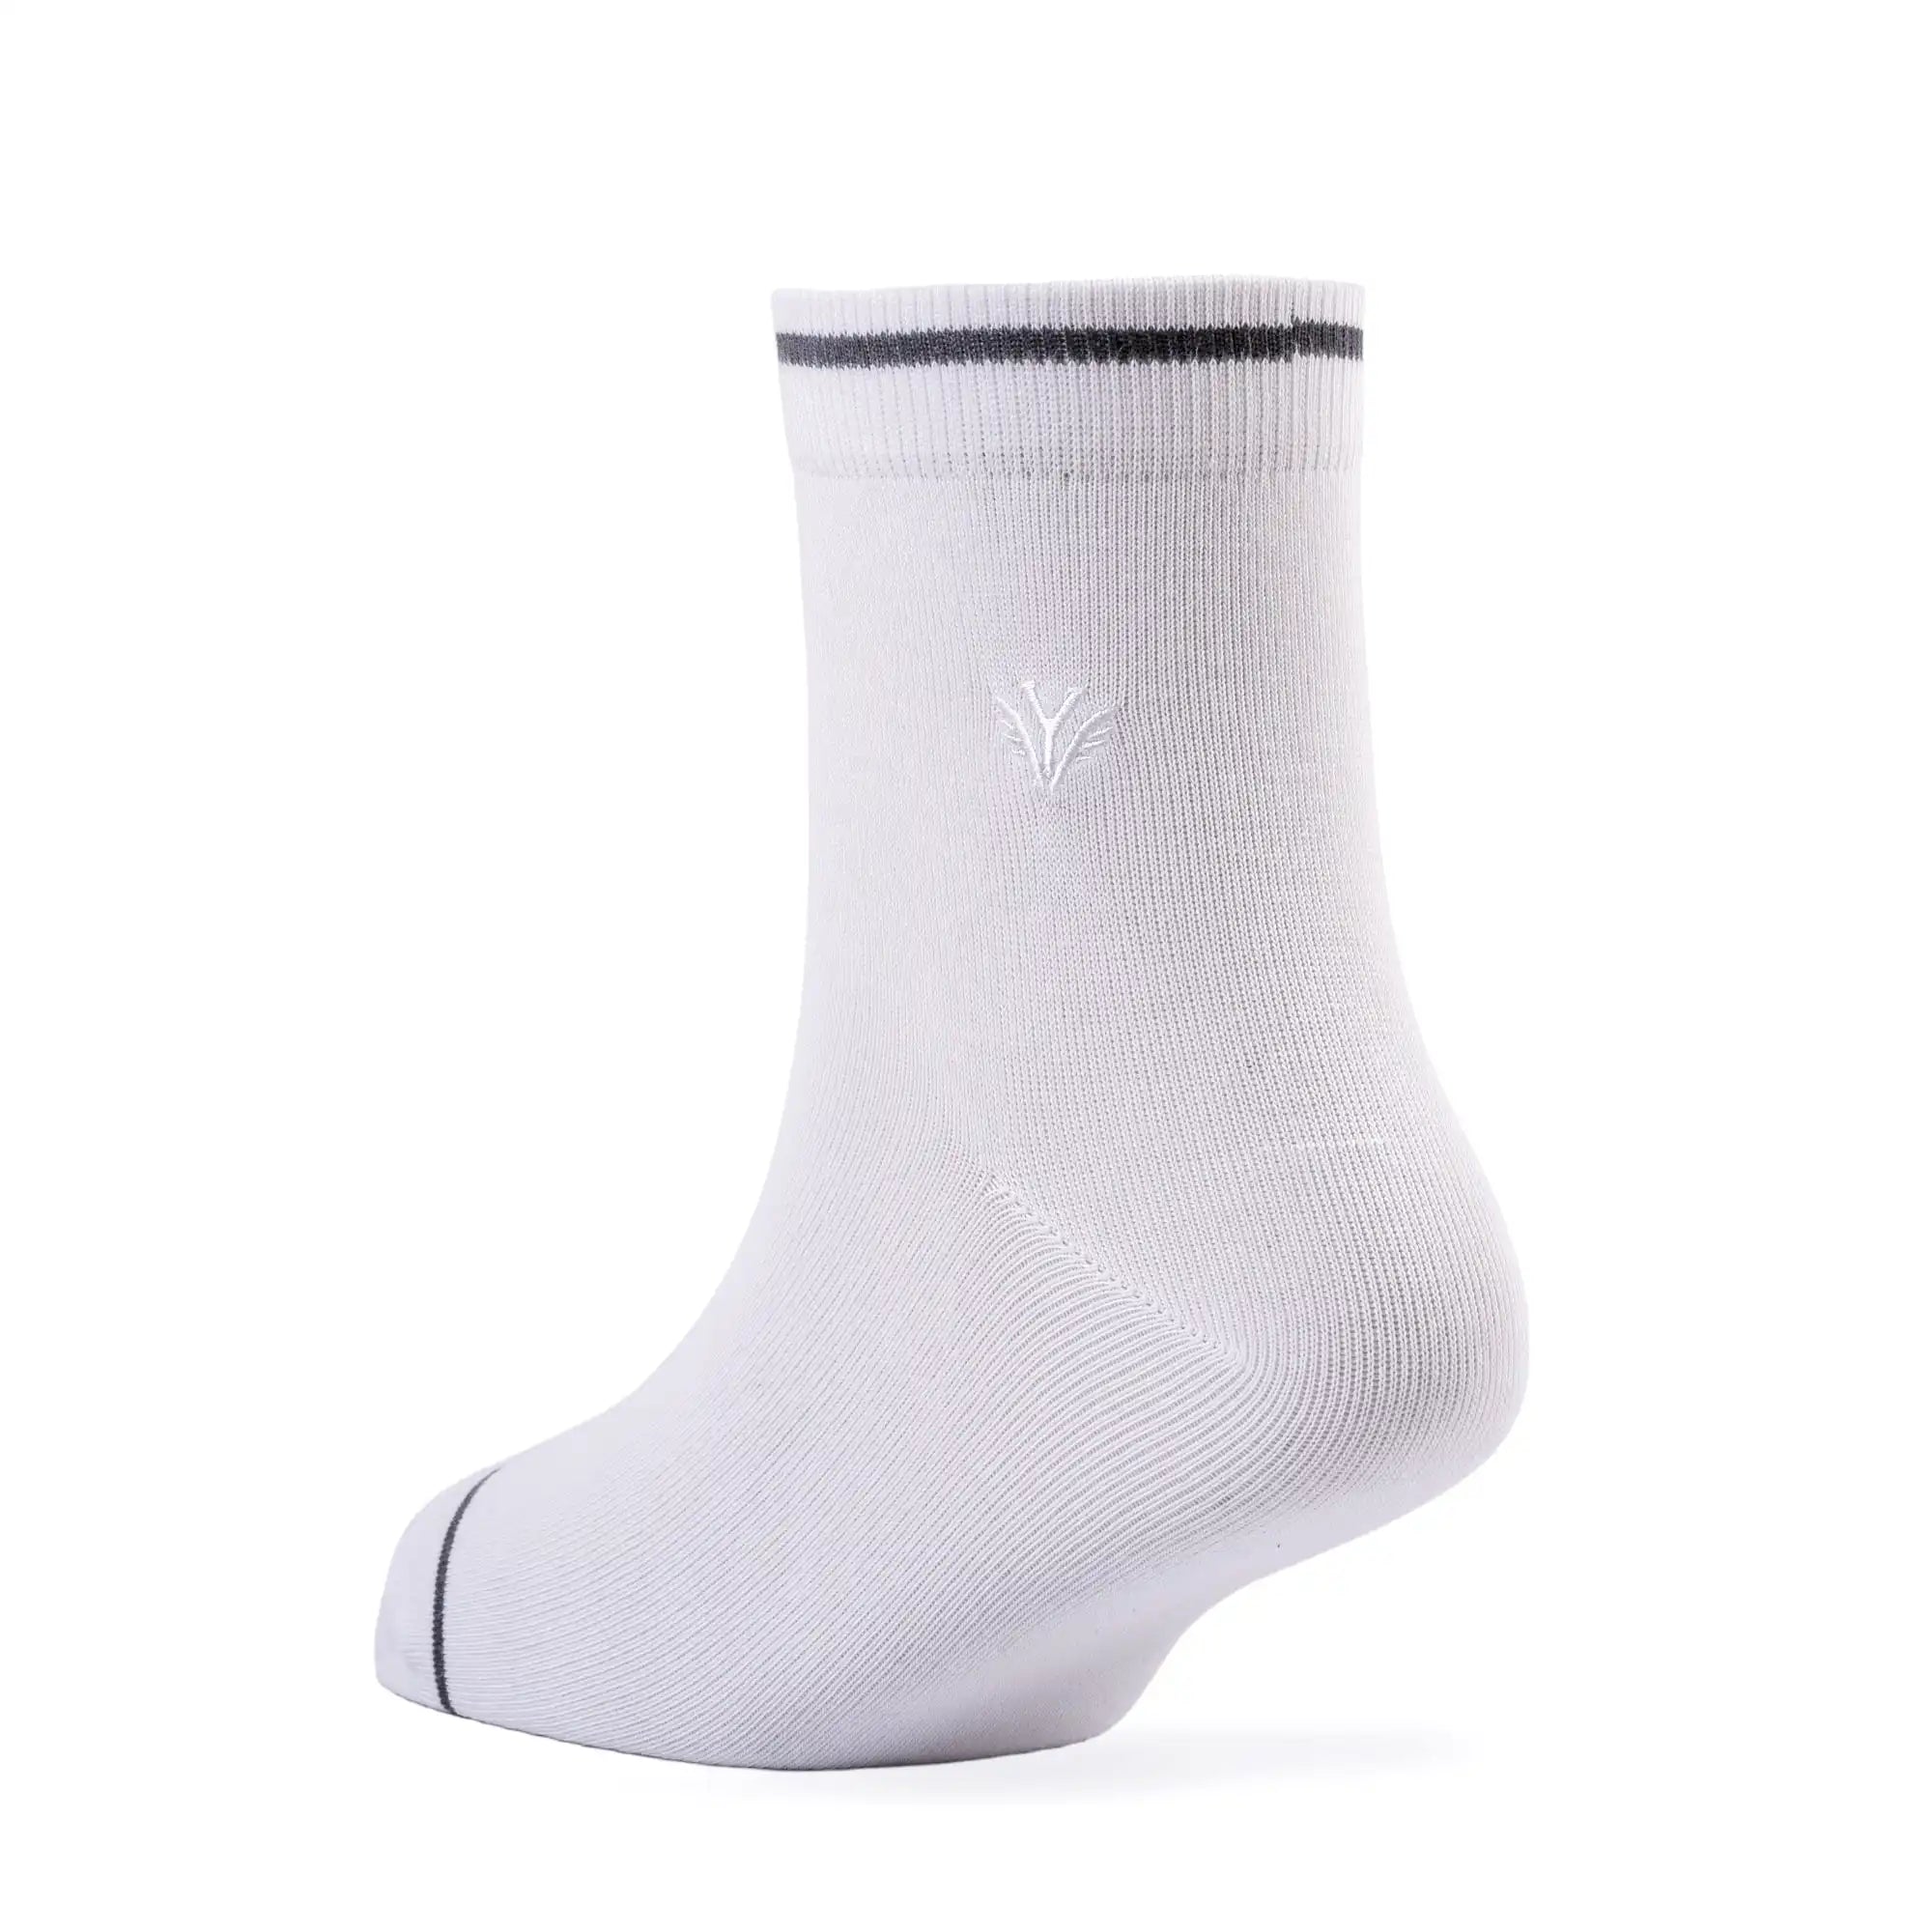 Young Wings Men's White Colour Cotton Fabric Solid Ankle Length Socks - Pack of 2, Style no. M1-280 N